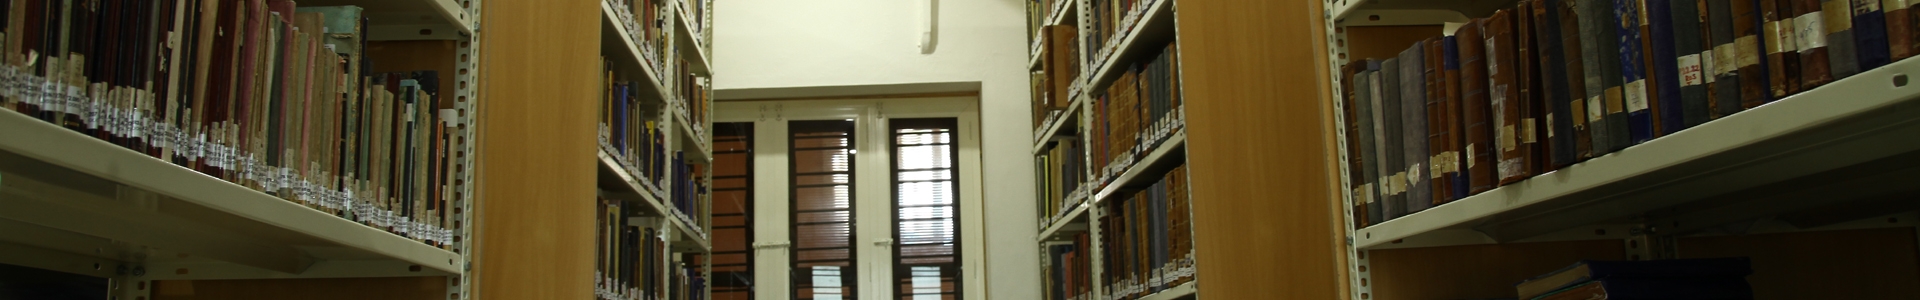 Archival Room